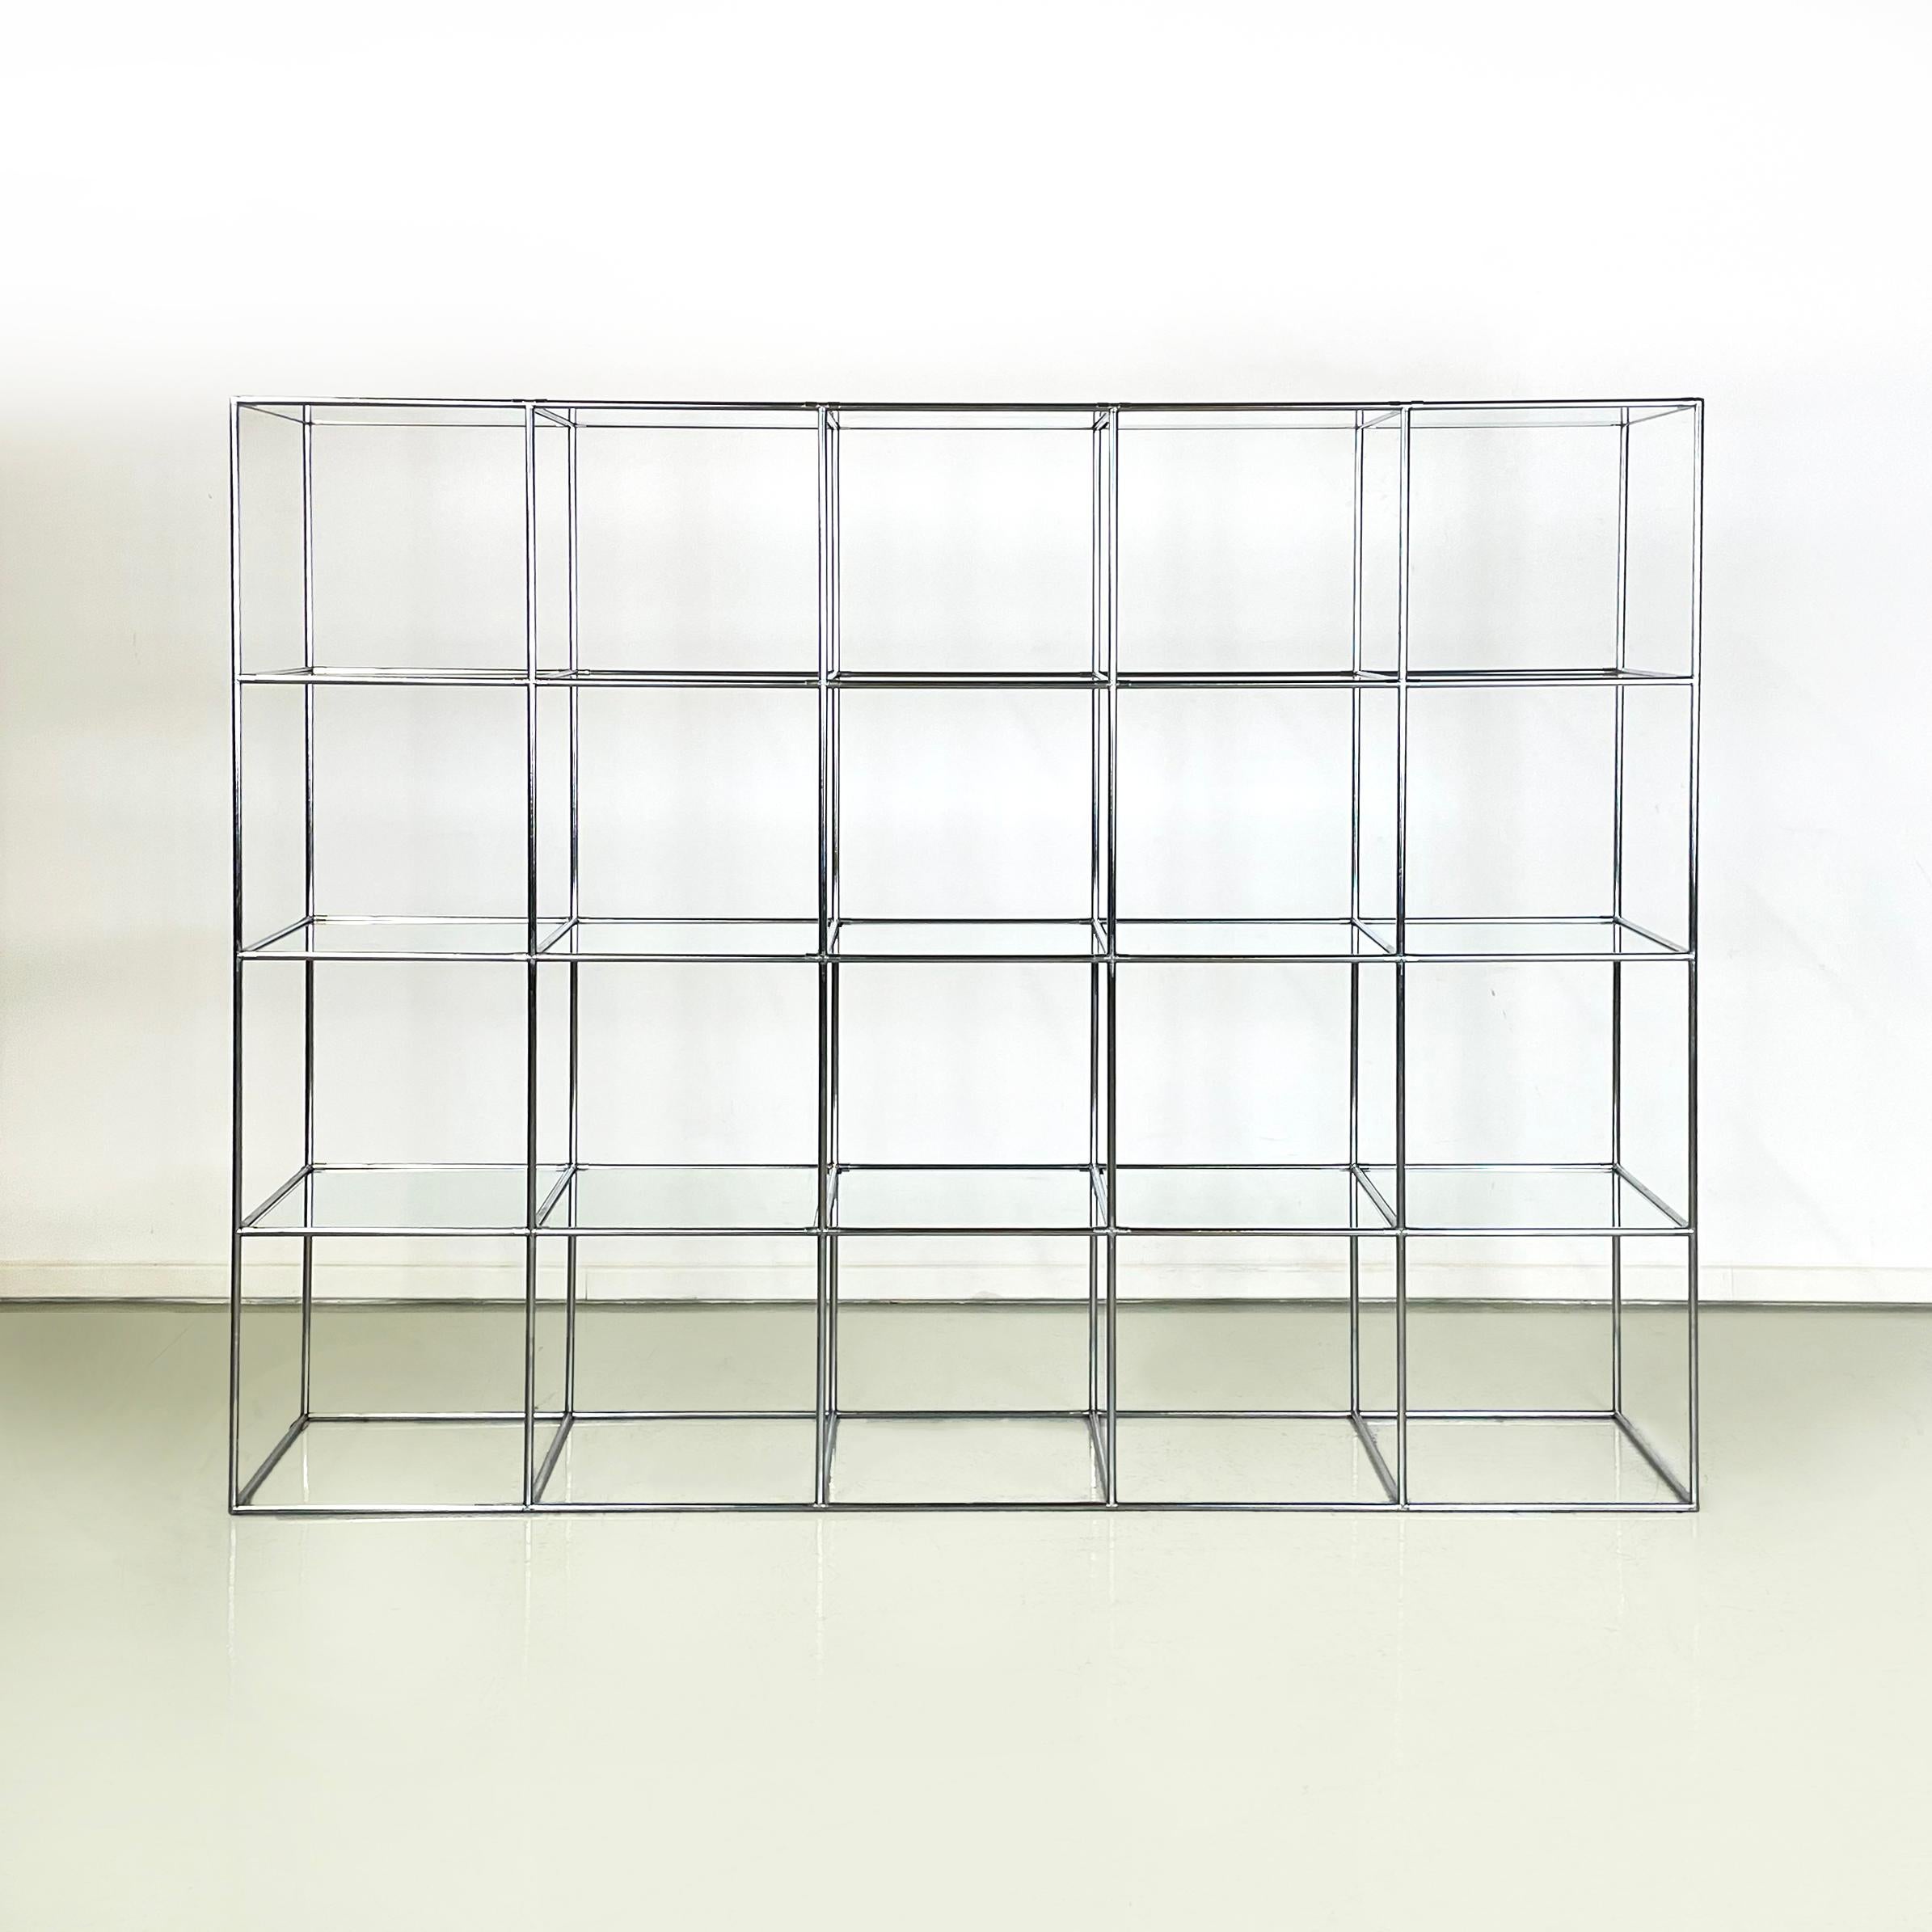 Danish modern glass and metal Bookcase Abstracta by Poul Cadovious, 1960s
Self-supporting floor bookcase mod. Abstracta with rectangular base in metal and glass. The bookcase has 20 glass shelves, resting on the metal rod structure.
Produced in